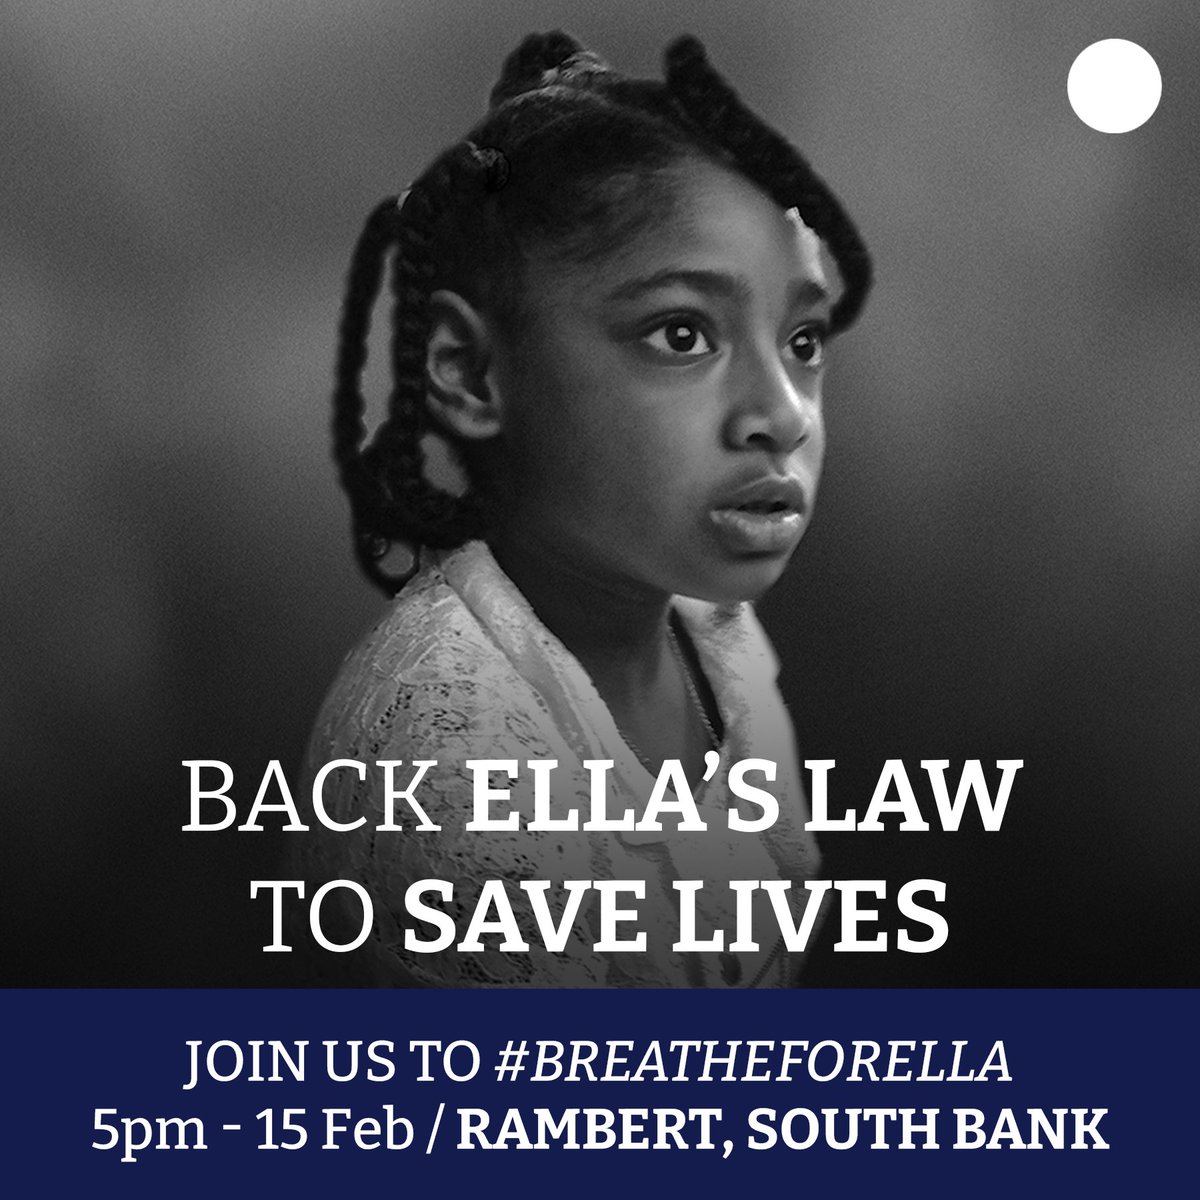 Join us in London on 15th Feb to mark 10yrs since the passing of 9yo Ella from Lewisham, the first person in the world to die of air pollution. A family event with art, music & performance to call for better futures for our children #EllasLaw #BreatheForElla @ellarobertafdn